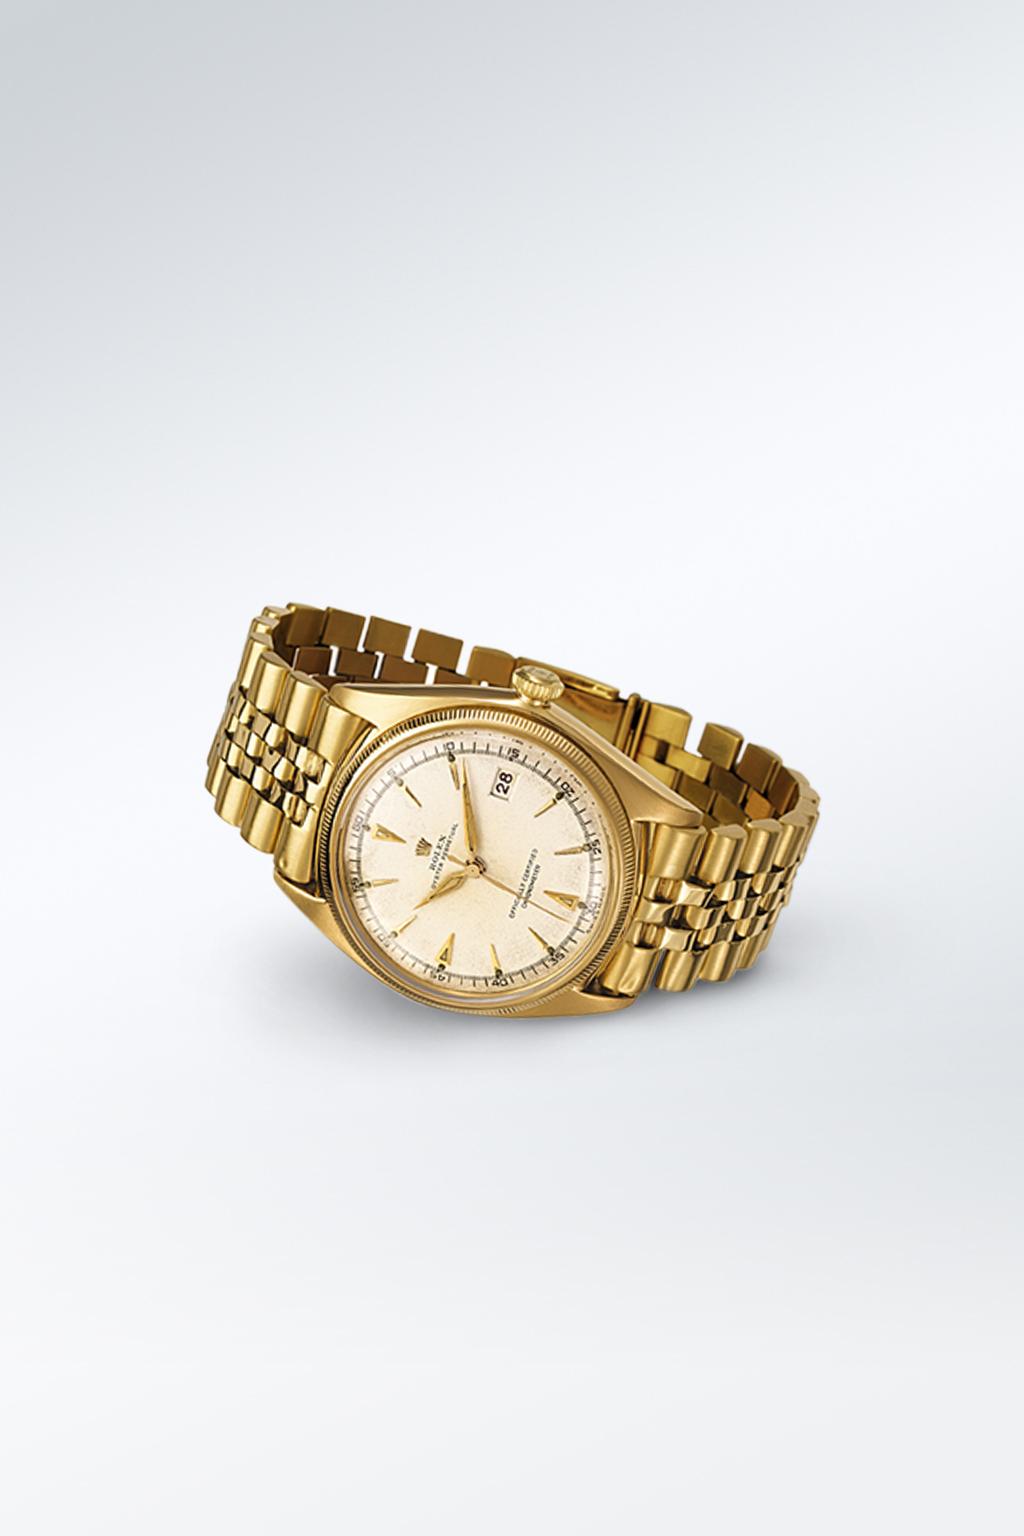 Spirit of the Datejust 31 THE FIRST DATEJUST The Datejust, introduced in 1945, was the first wristwatch to display the date through an aperture on the dial.